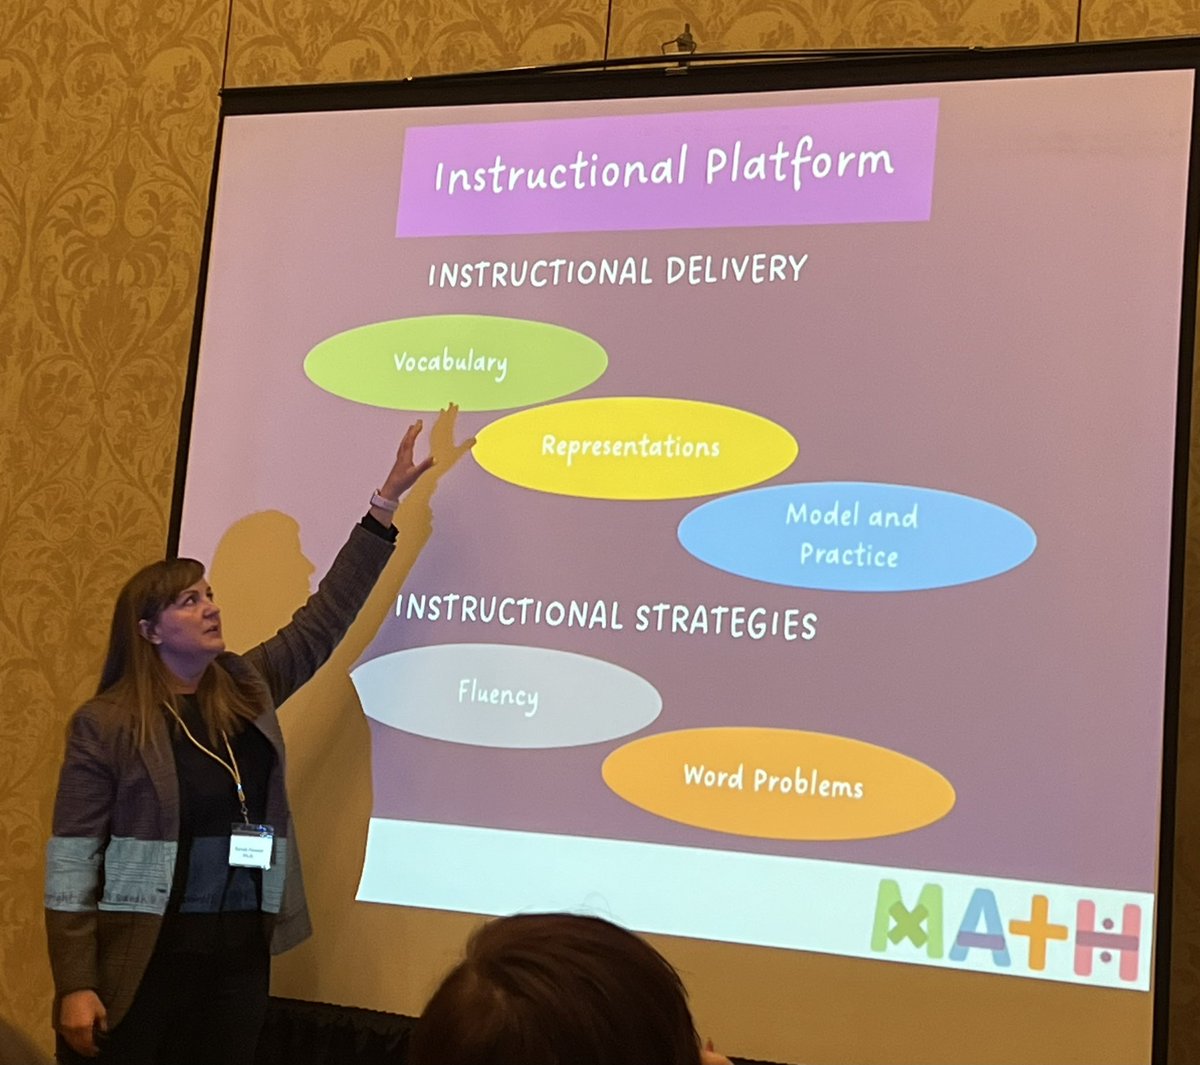 Awesome session with @sarahpowellphd learning about the Essential Components of Math Interventions and SDI. @RIDeptEd @rimtamath @mrsmello9 #Math4All